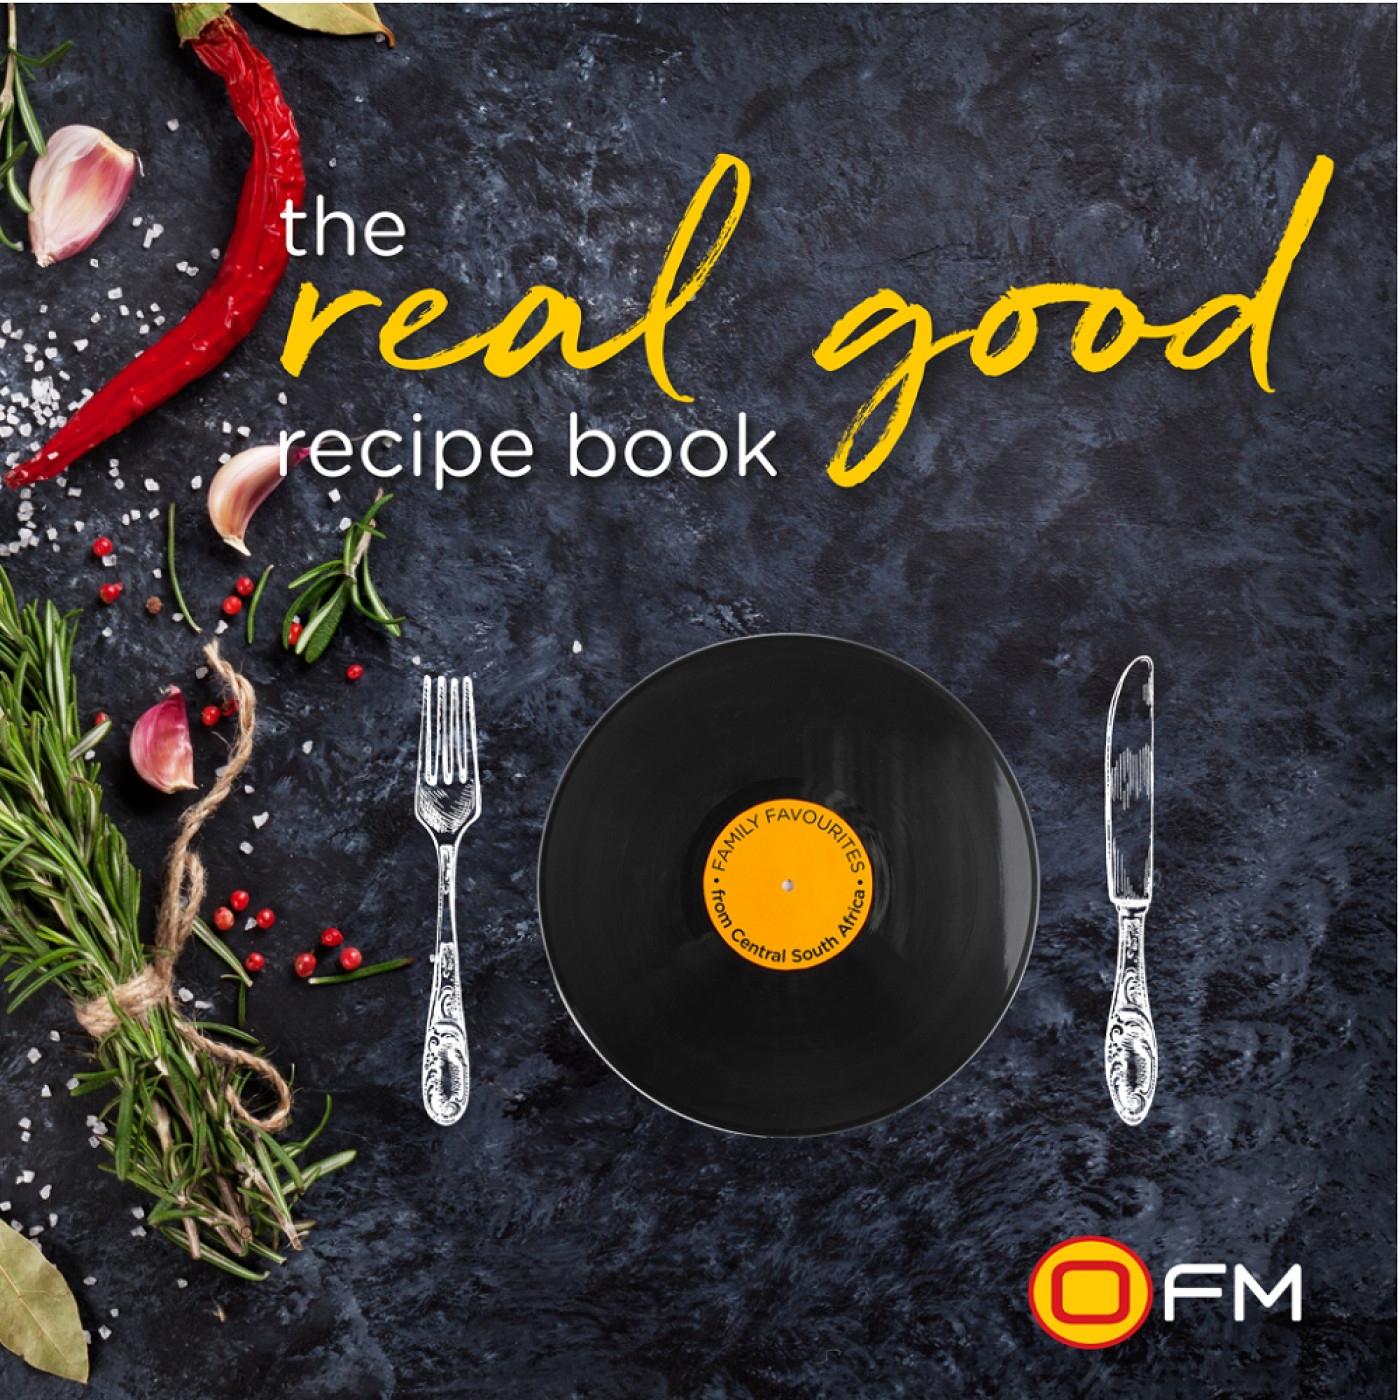 The Real Good Recipe Book Advertiser: Magnifisan